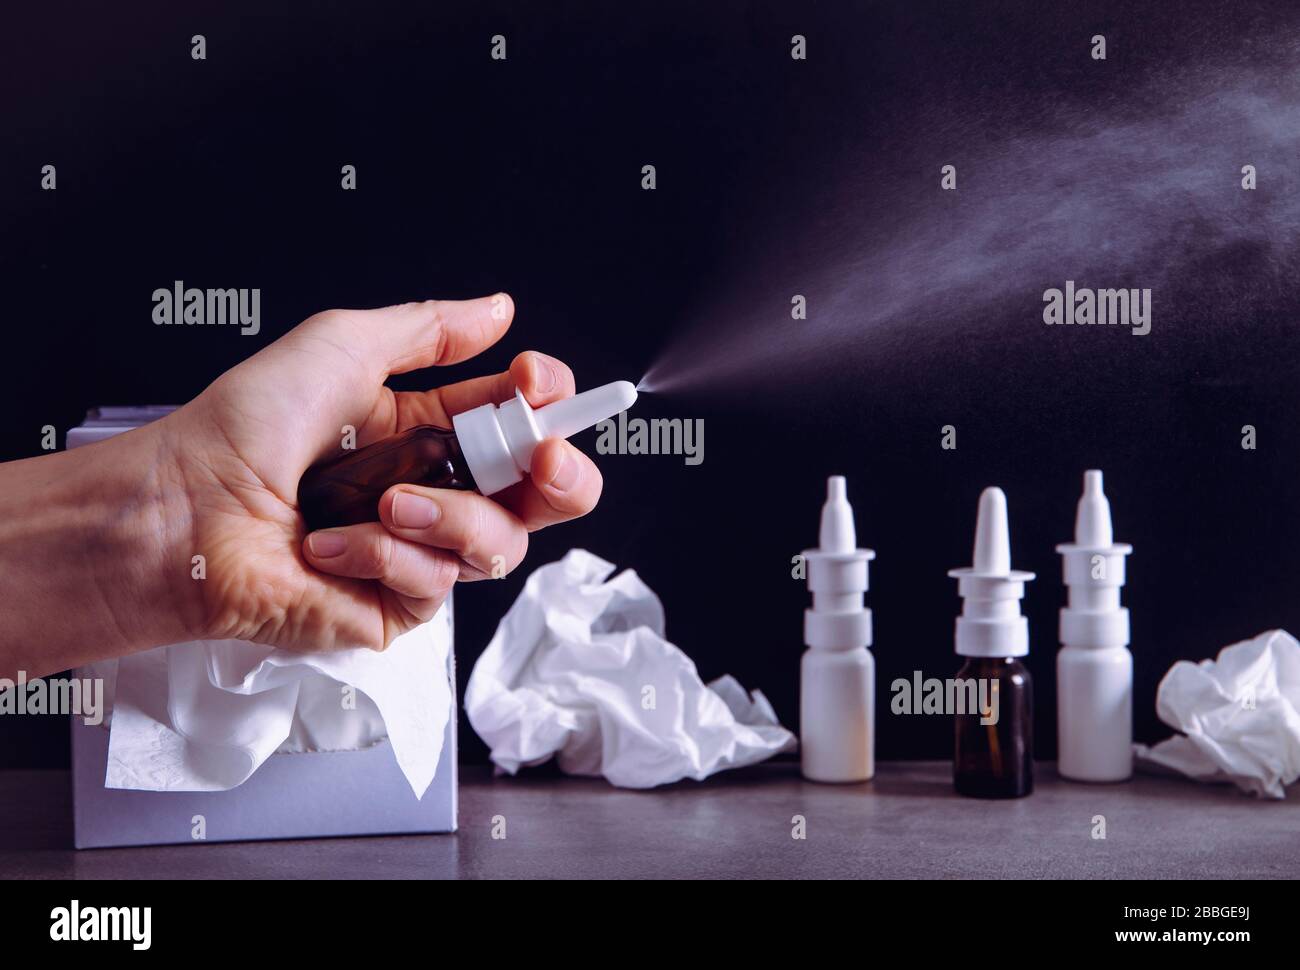 Woman hand using holding nose nasal spray treatment spray bottle and spraying. Fighting the flu and common cold concept. Lot of empty bottles. Stock Photo